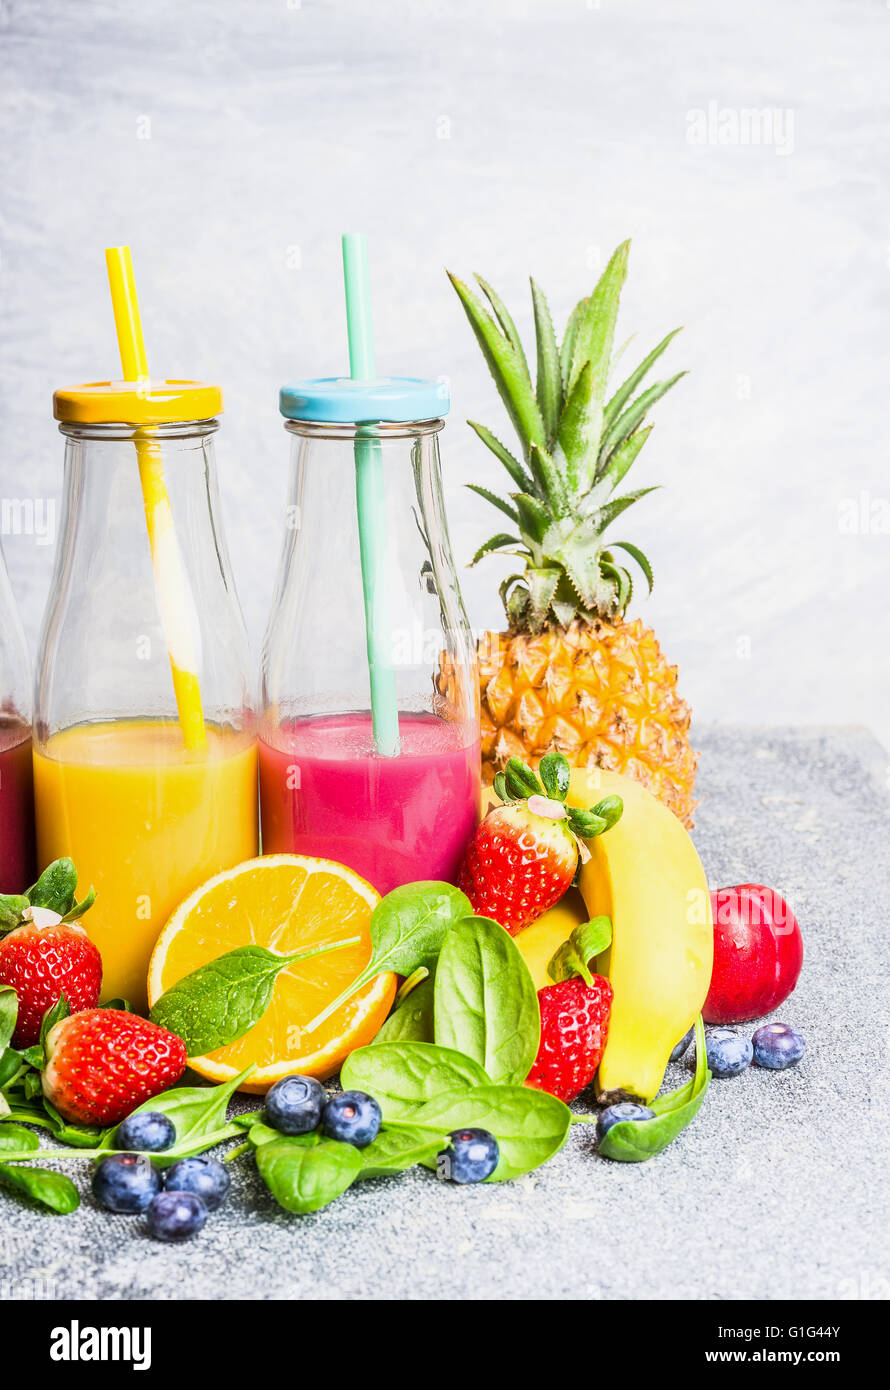 Red and yellow smoothies drinks in bottles with fruits ingredients on light background. Healthy lifestyle, Detox or diet food co Stock Photo